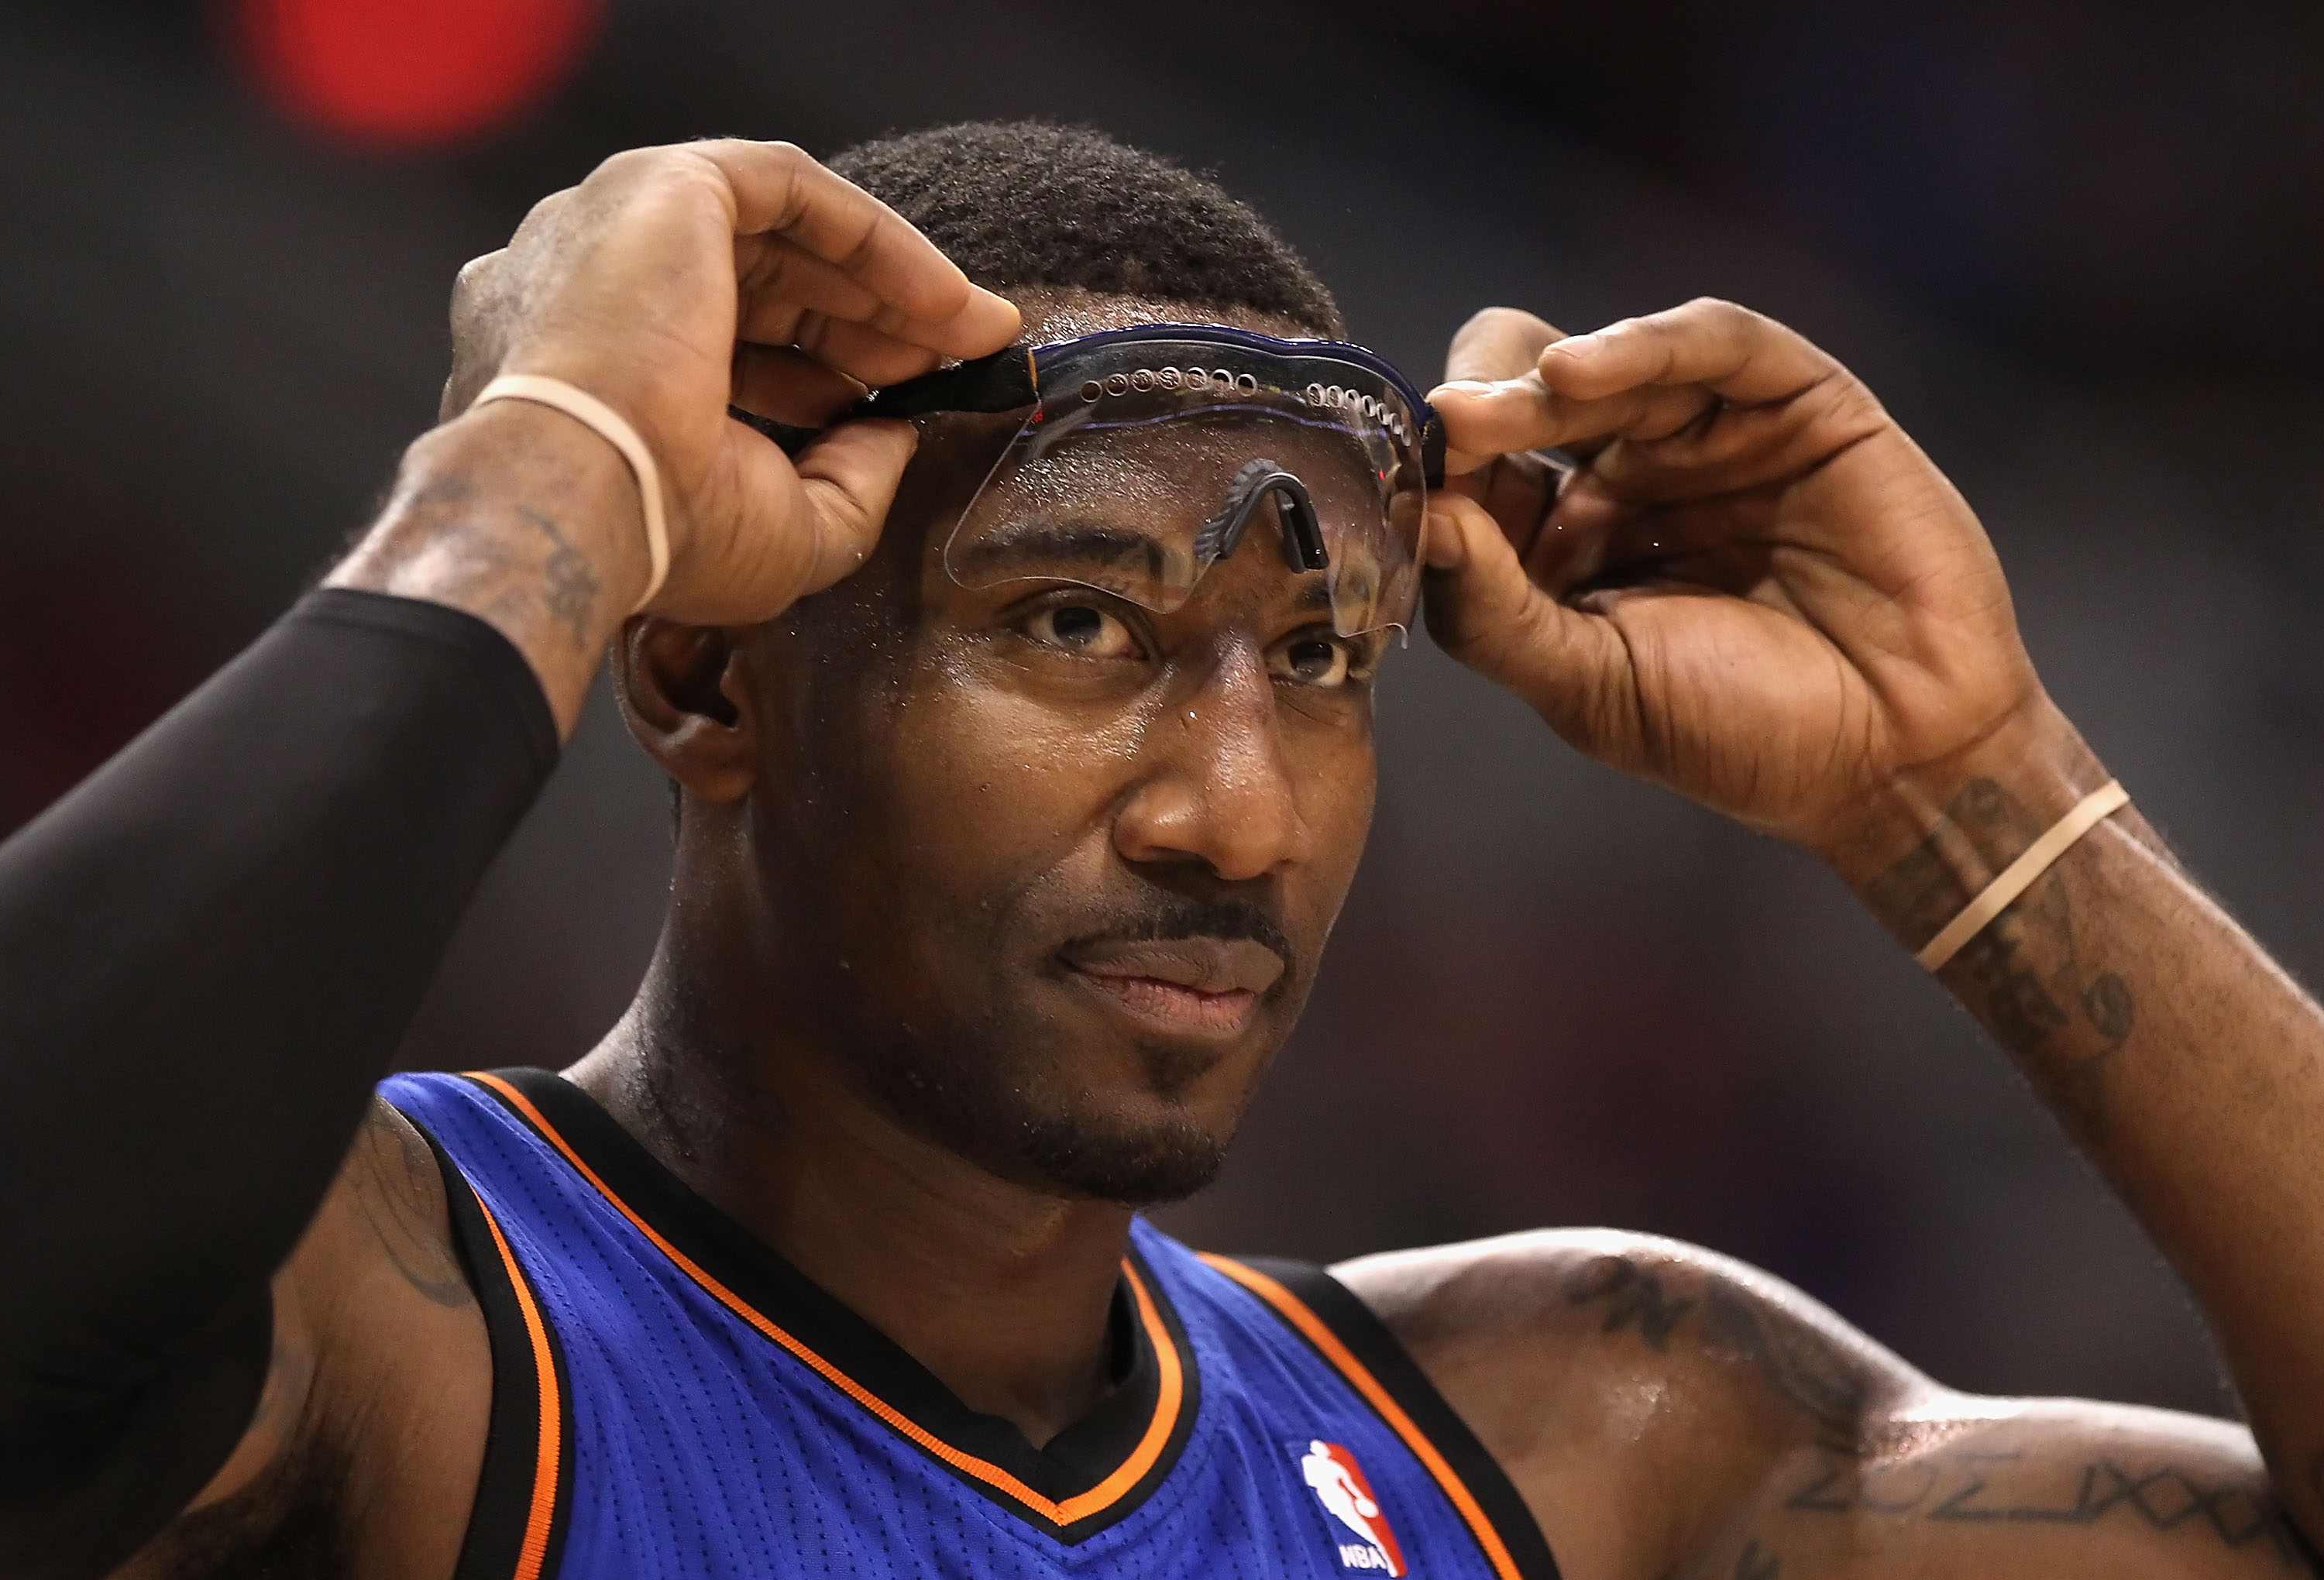 PHOENIX, AZ - JANUARY 07:  Amar'e Stoudemire #1 of the New York Knicks during the NBA game against the Phoenix Suns at US Airways Center on January 7, 2011 in Phoenix, Arizona.  NOTE TO USER: User expressly acknowledges and agrees that, by downloading and